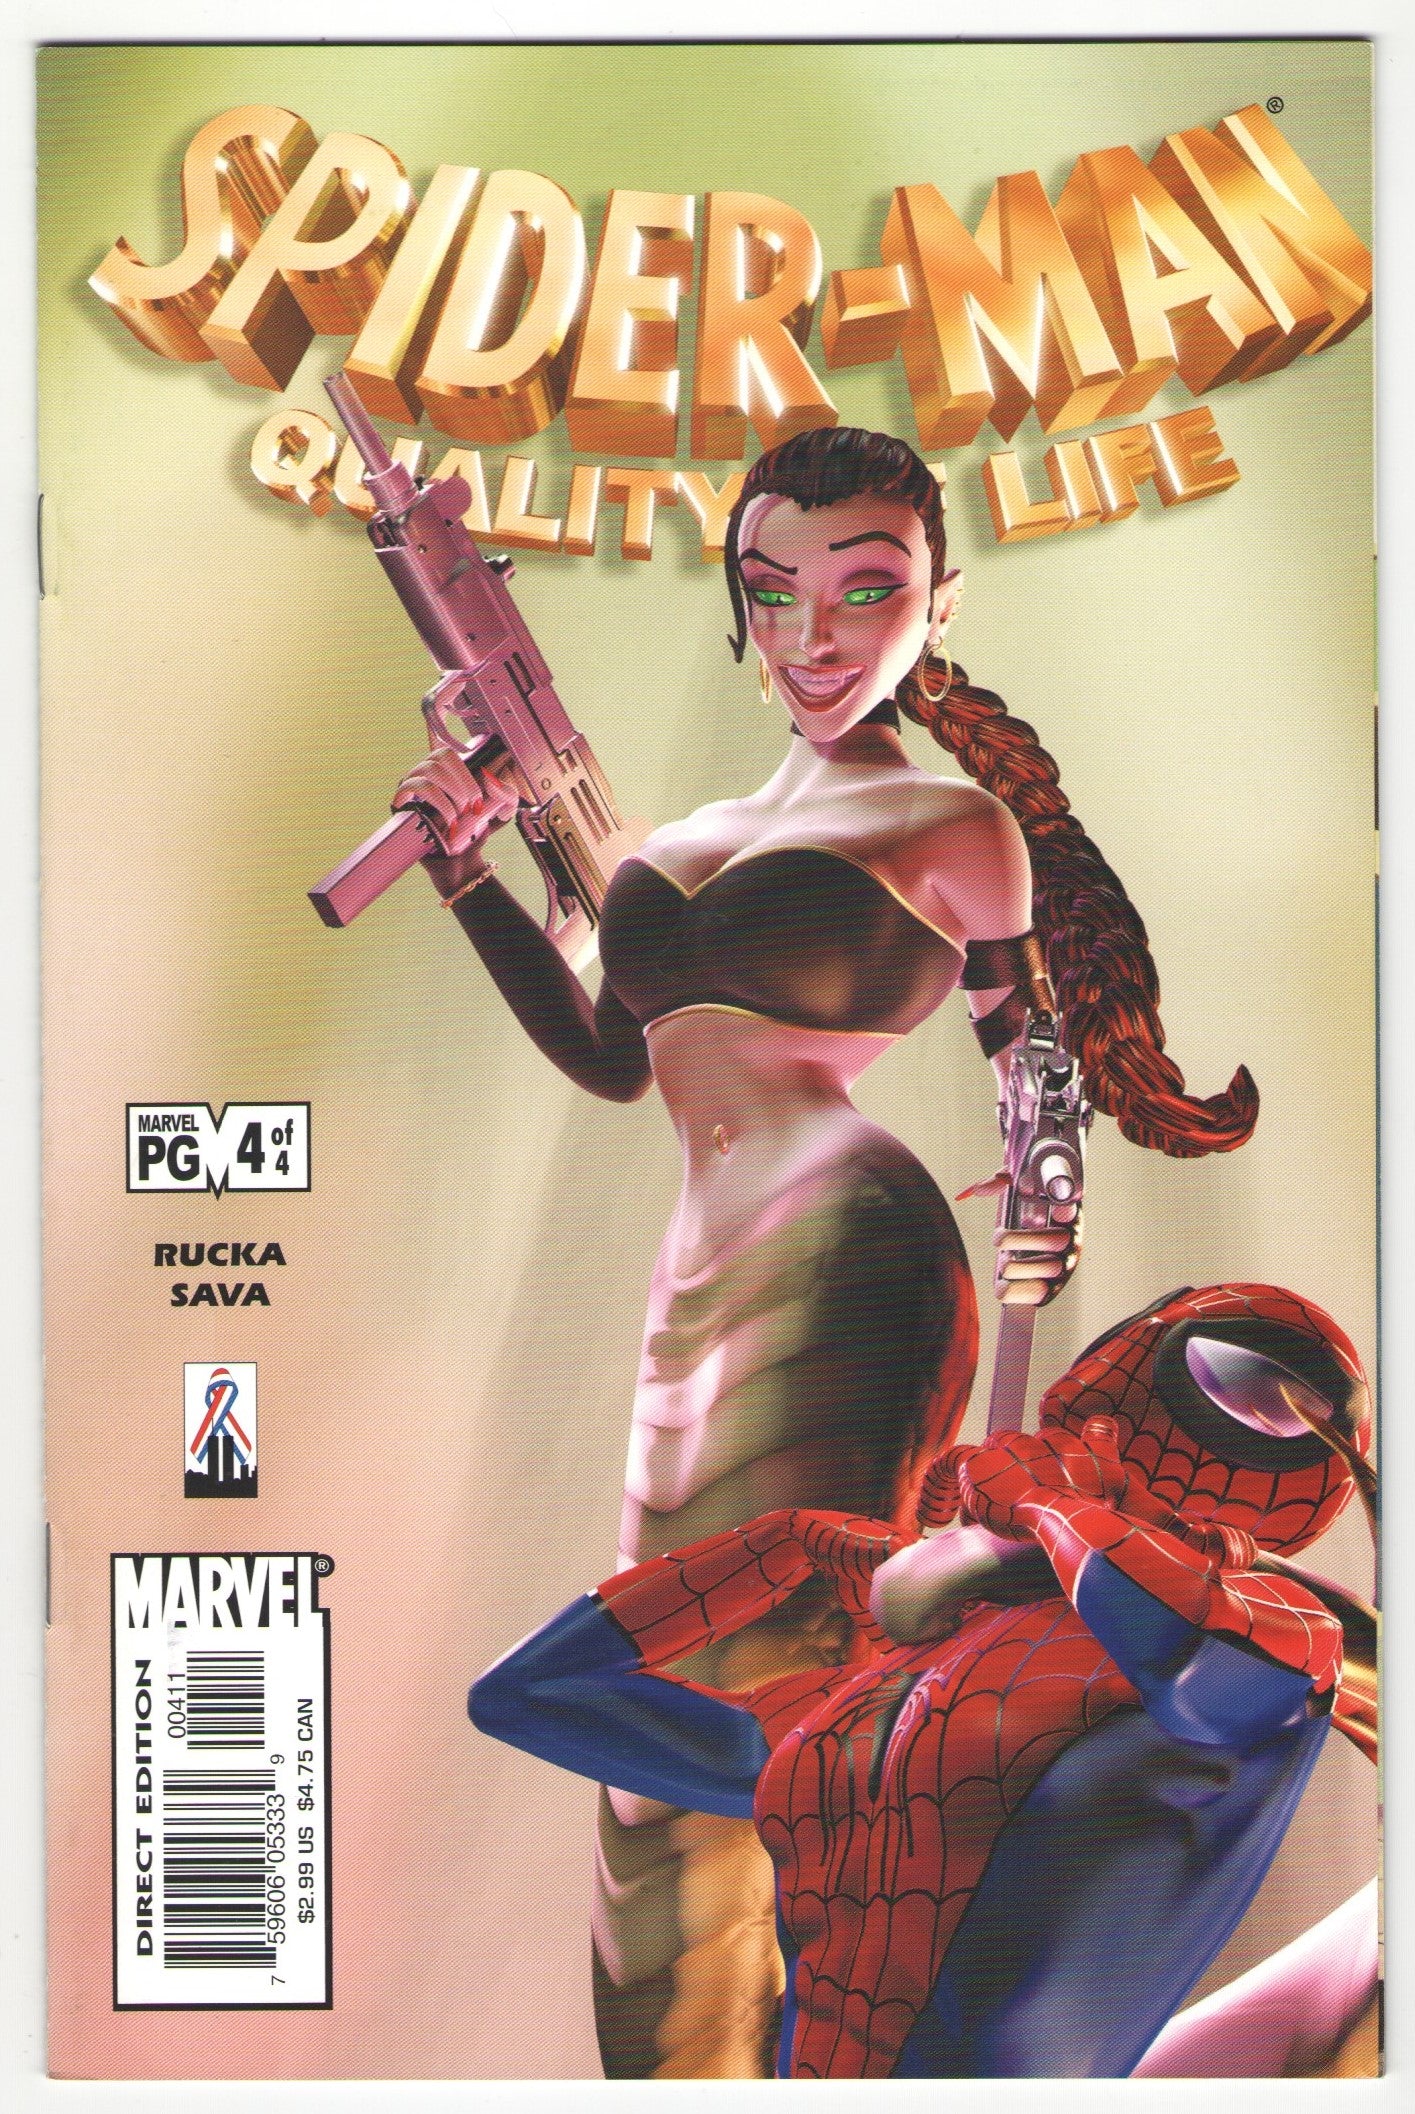 Spider-Man: Quality of Life (2002) Completed Limited Series